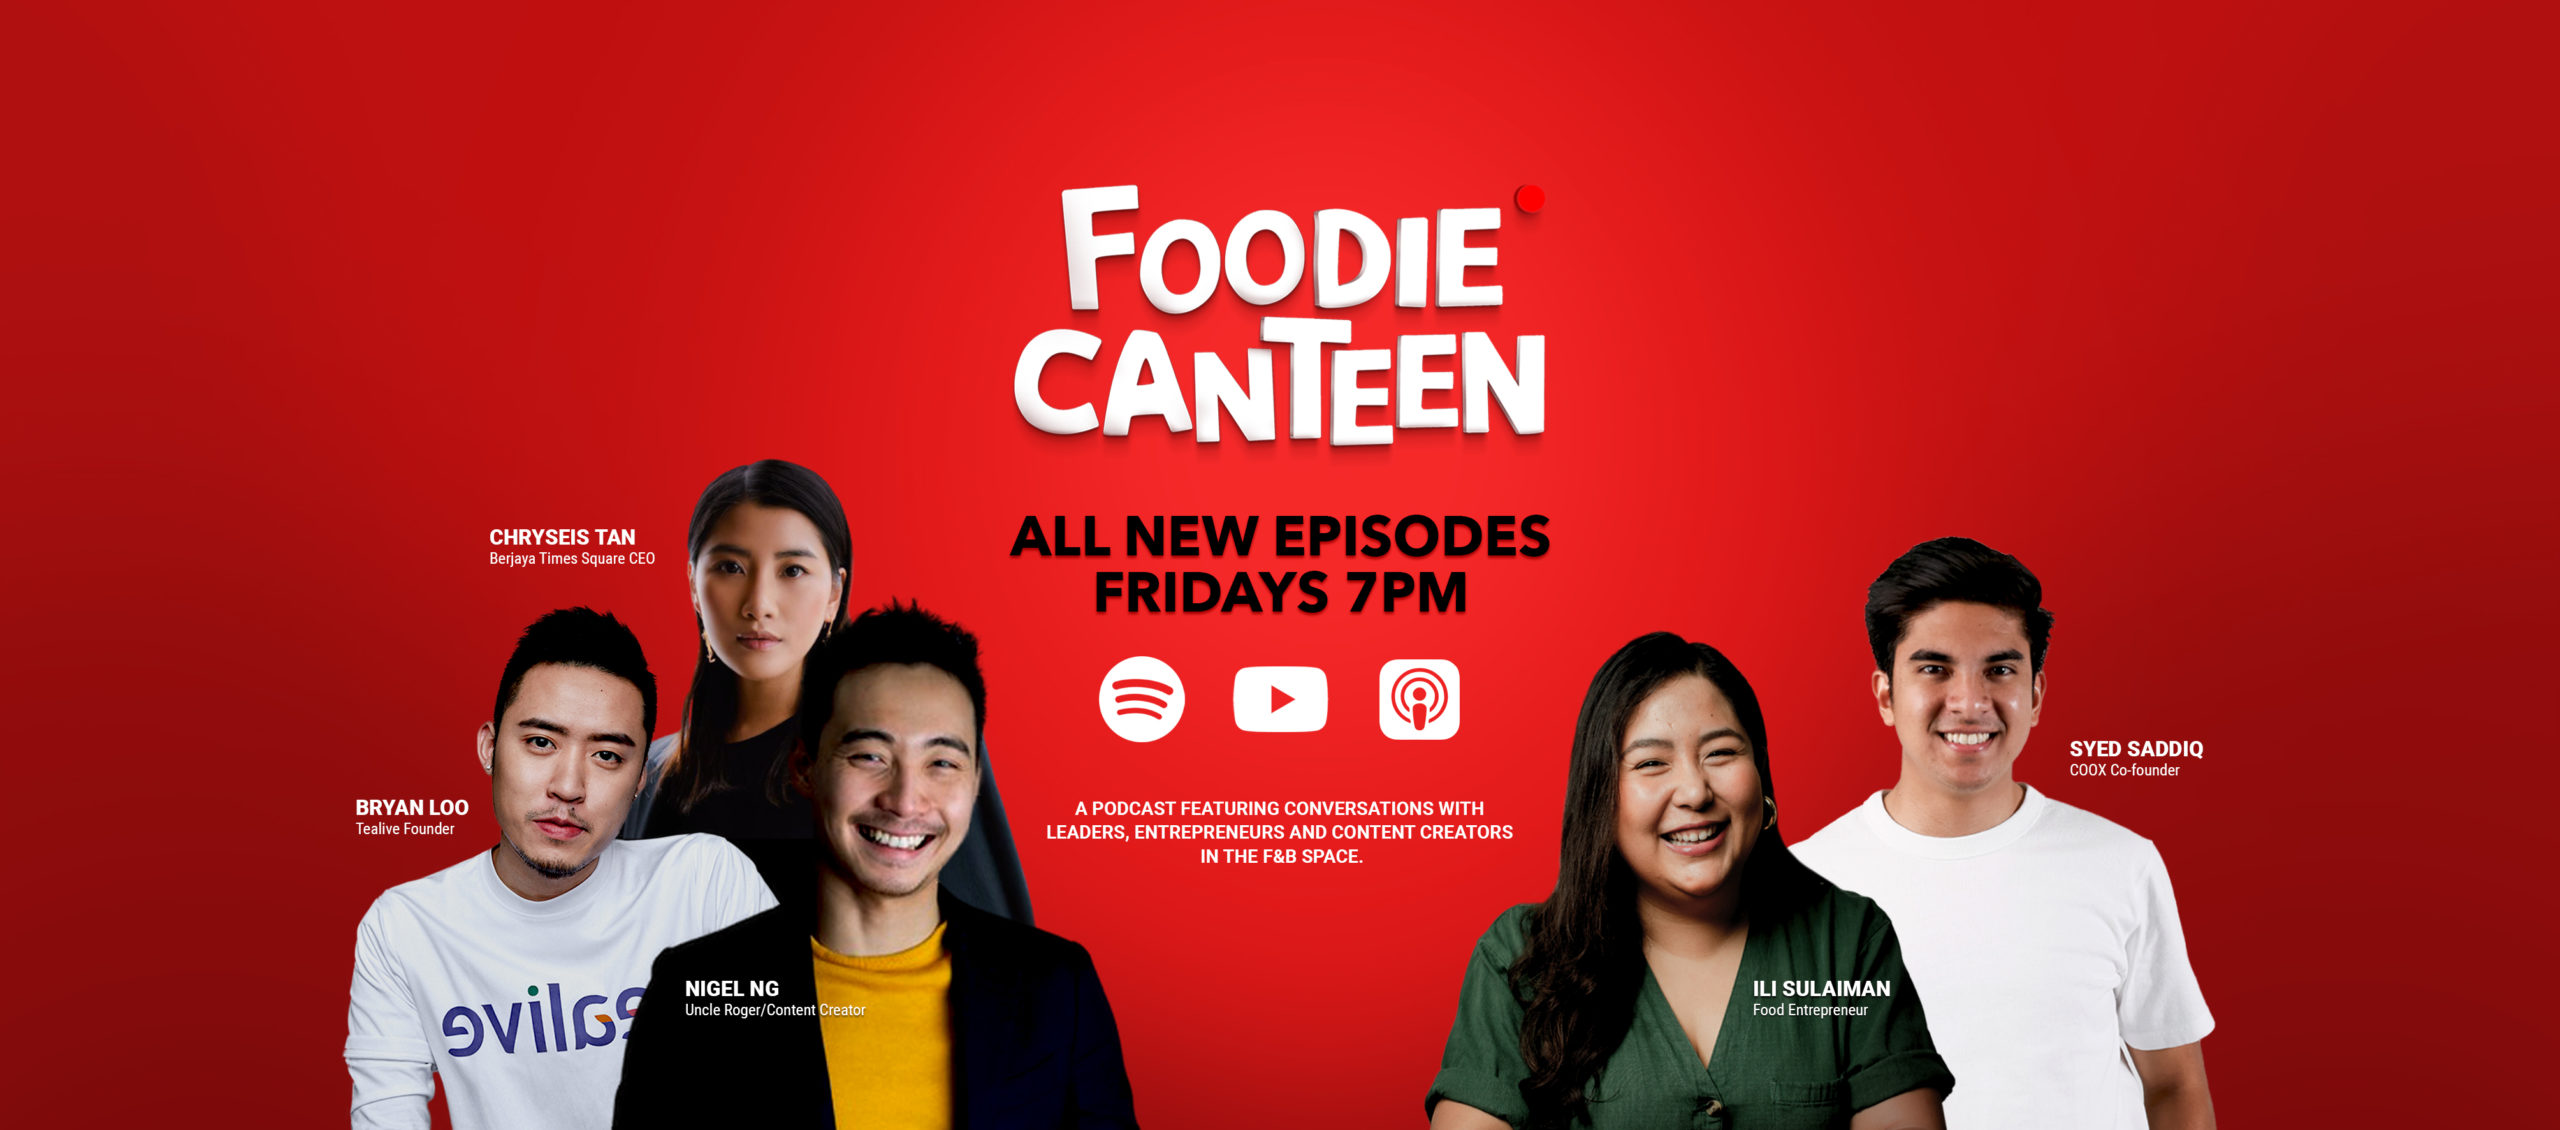 Foodie Canteen